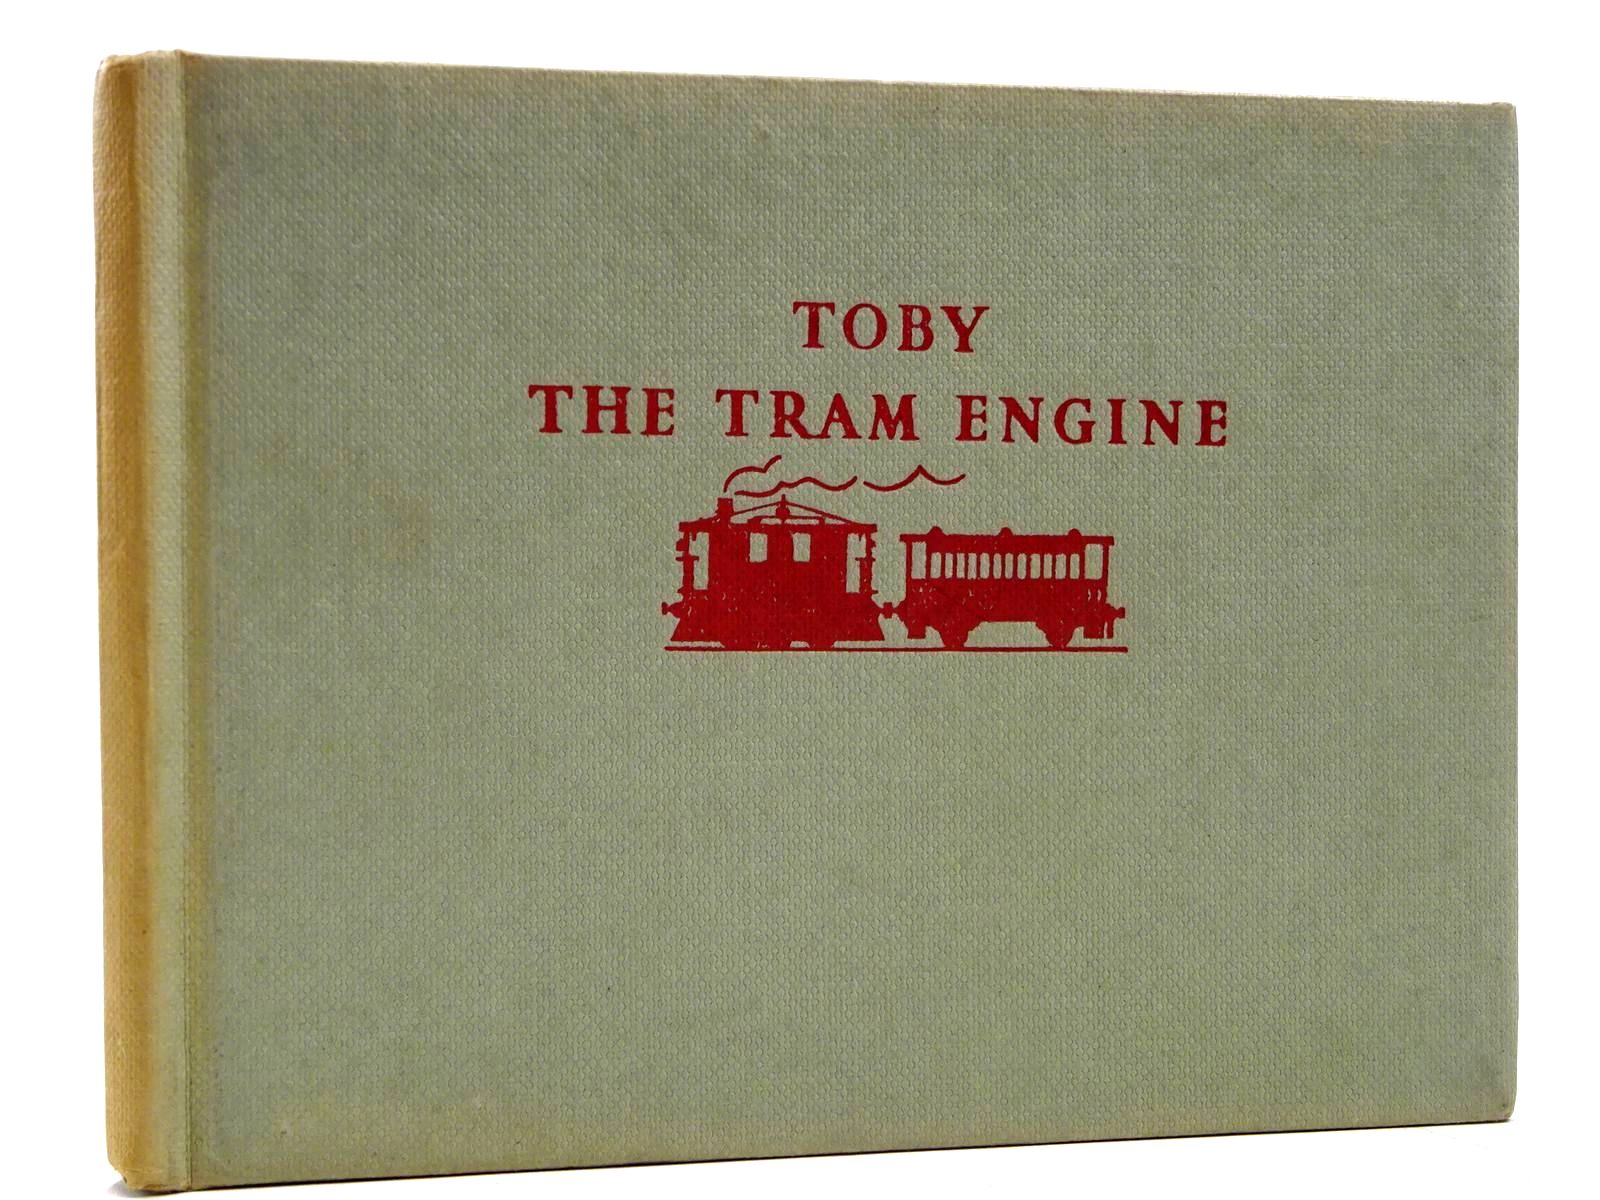 Photo of TOBY THE TRAM ENGINE written by Awdry, Rev. W. illustrated by Dalby, C. Reginald published by Edmund Ward (STOCK CODE: 2131107)  for sale by Stella & Rose's Books